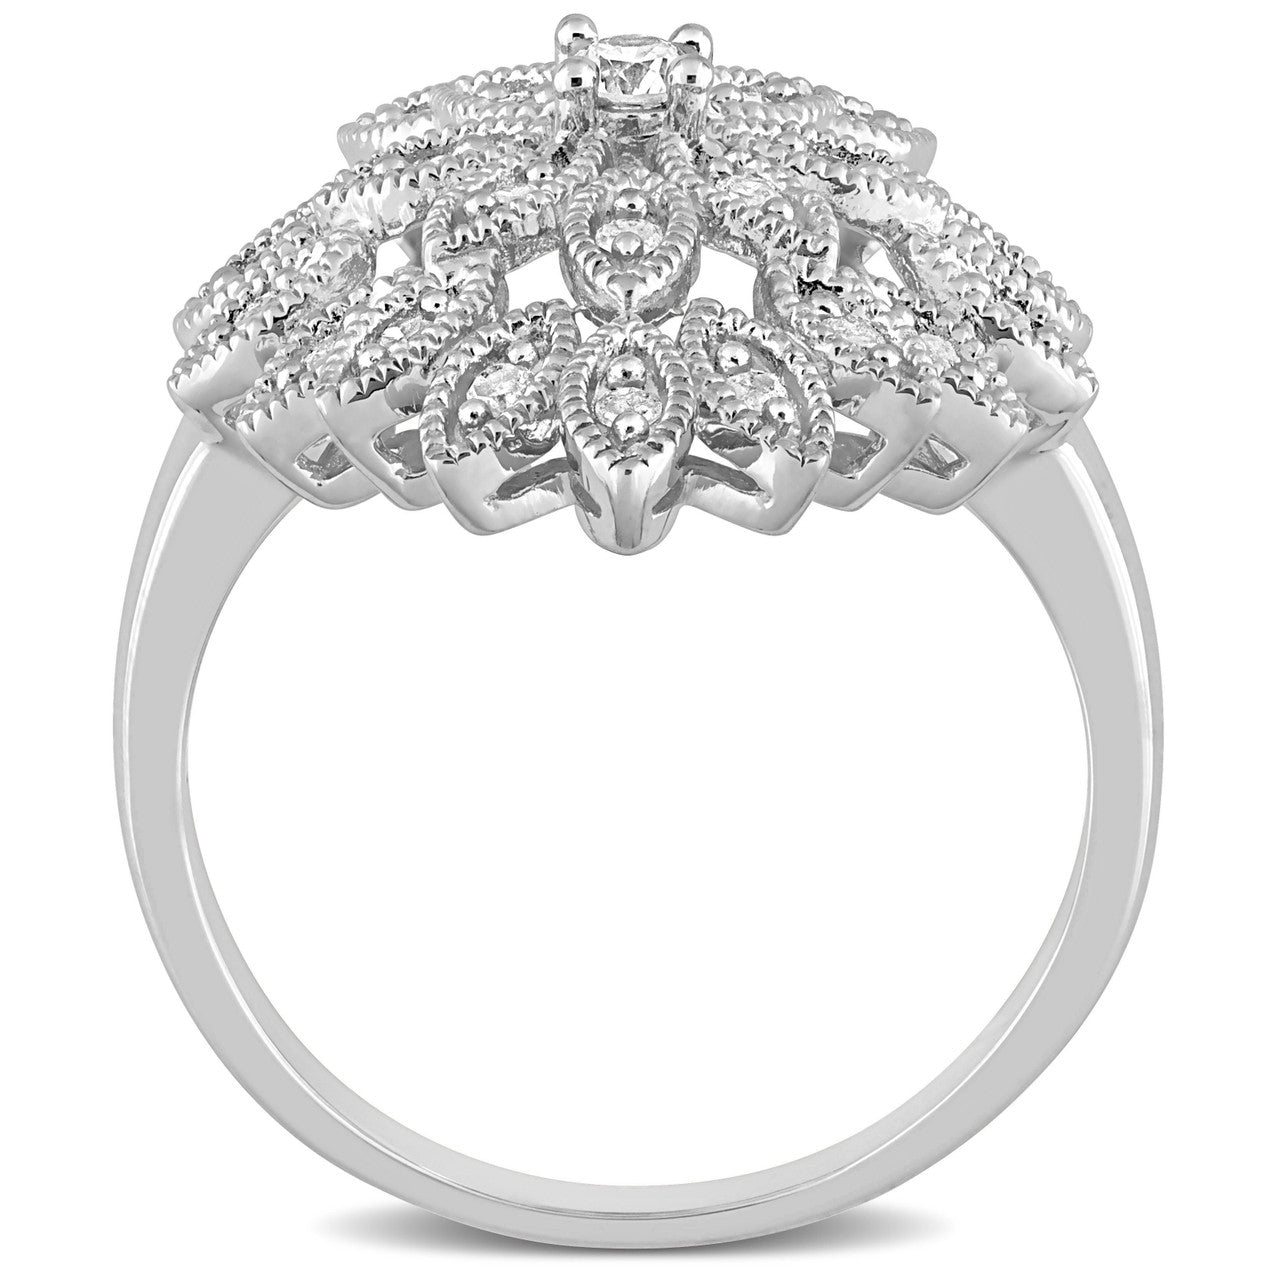 Ice Jewellery 1/3 CT Diamond Floral Ring in Sterling Silver - 75000005721 | Ice Jewellery Australia